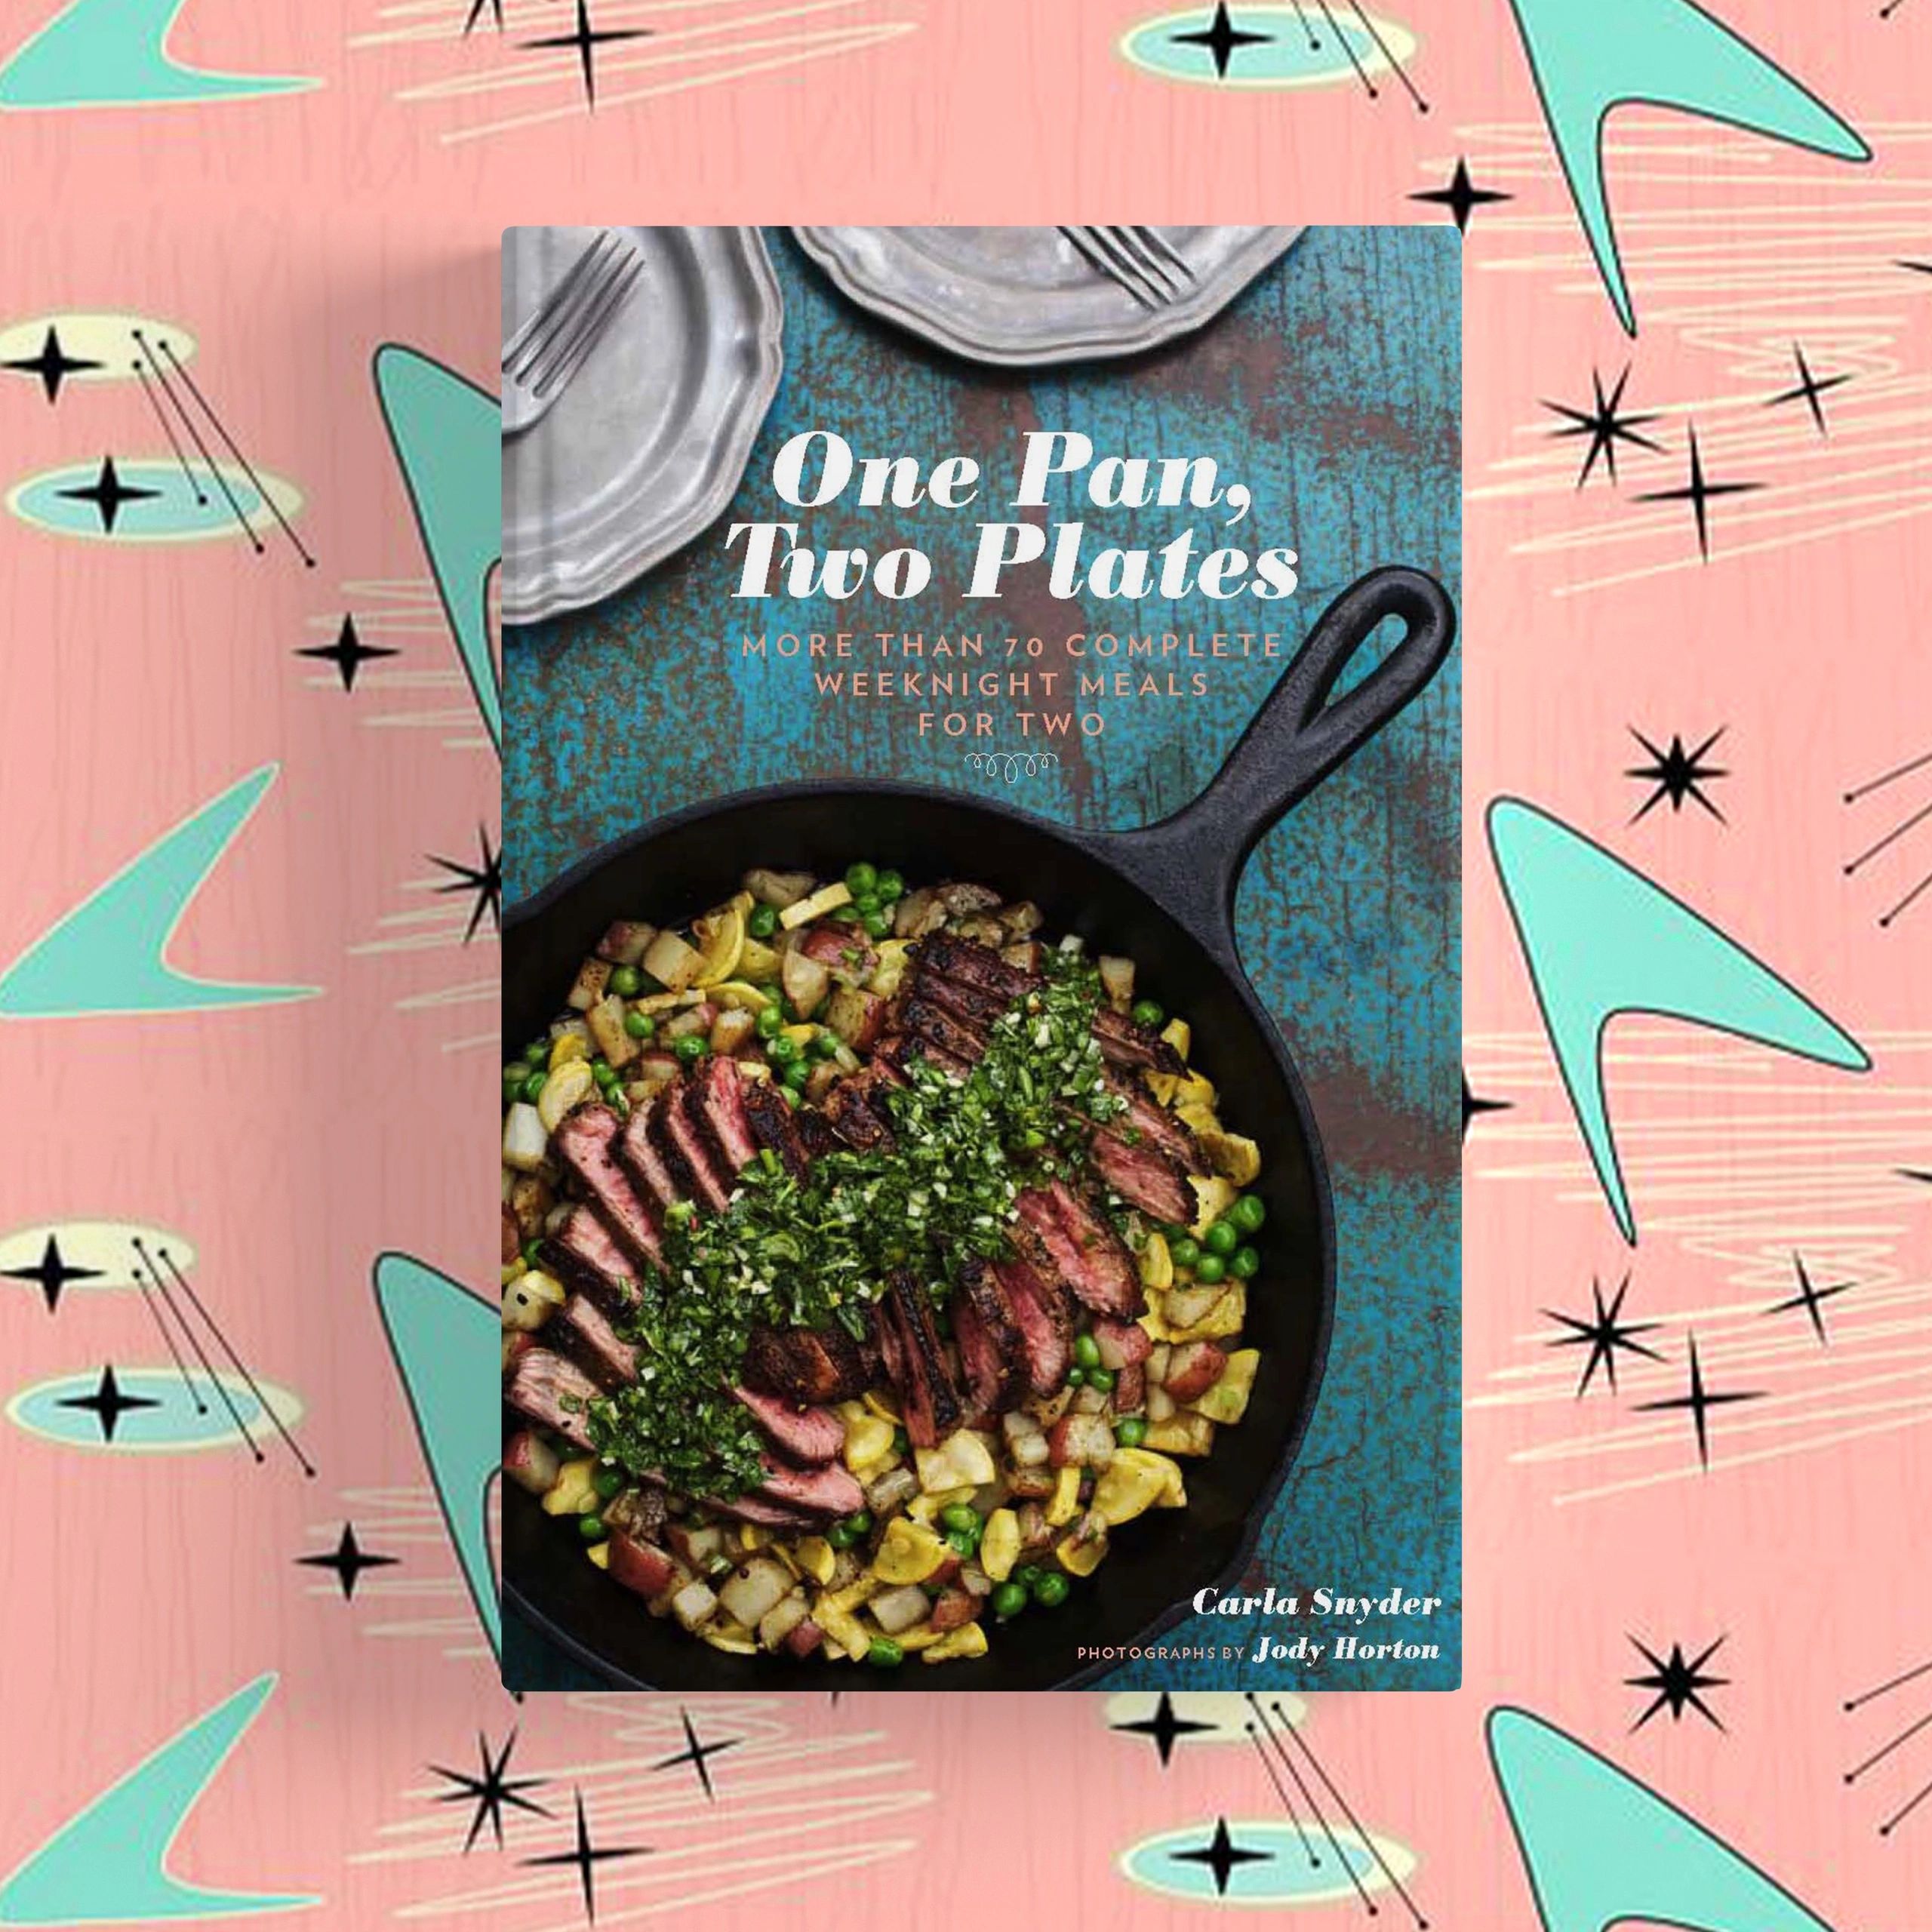 Review: 'One Pan, Two Plates' (Carla Snyder)